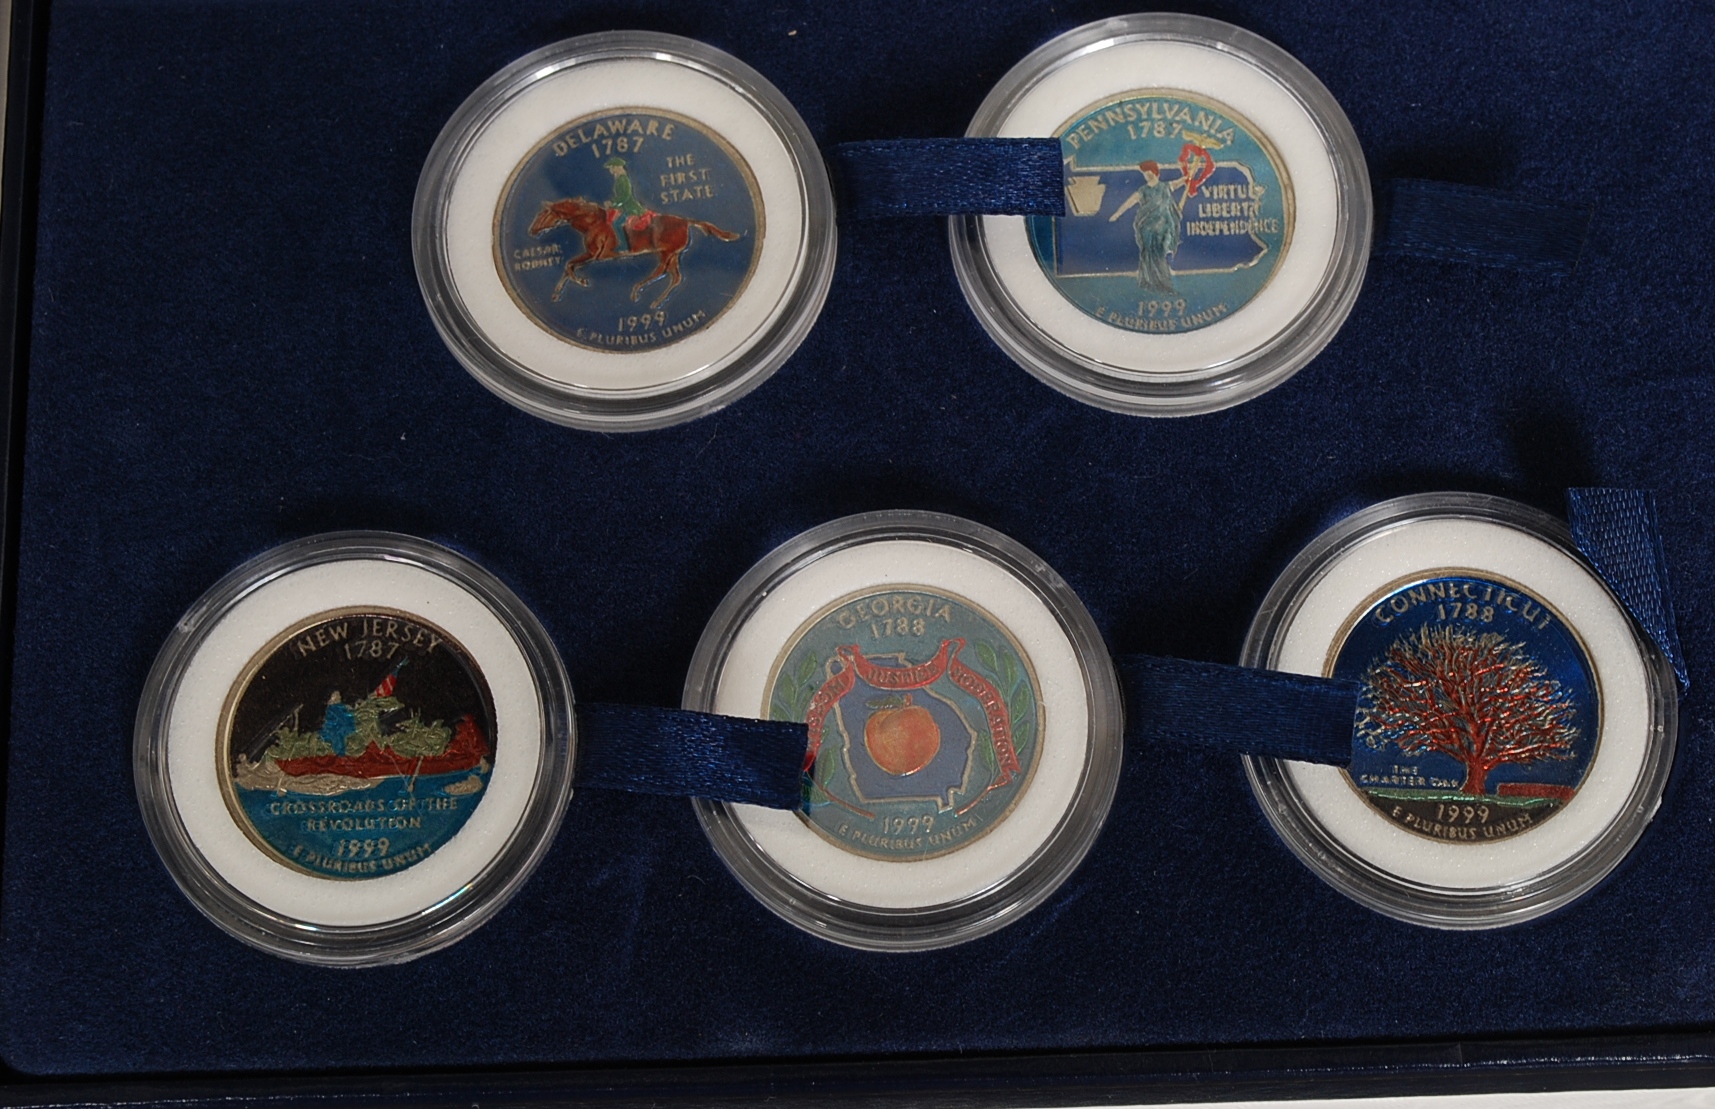 2 cased sets of five statehood colorized enamel quarter dollars - inaugural edition 1999, - Image 3 of 4